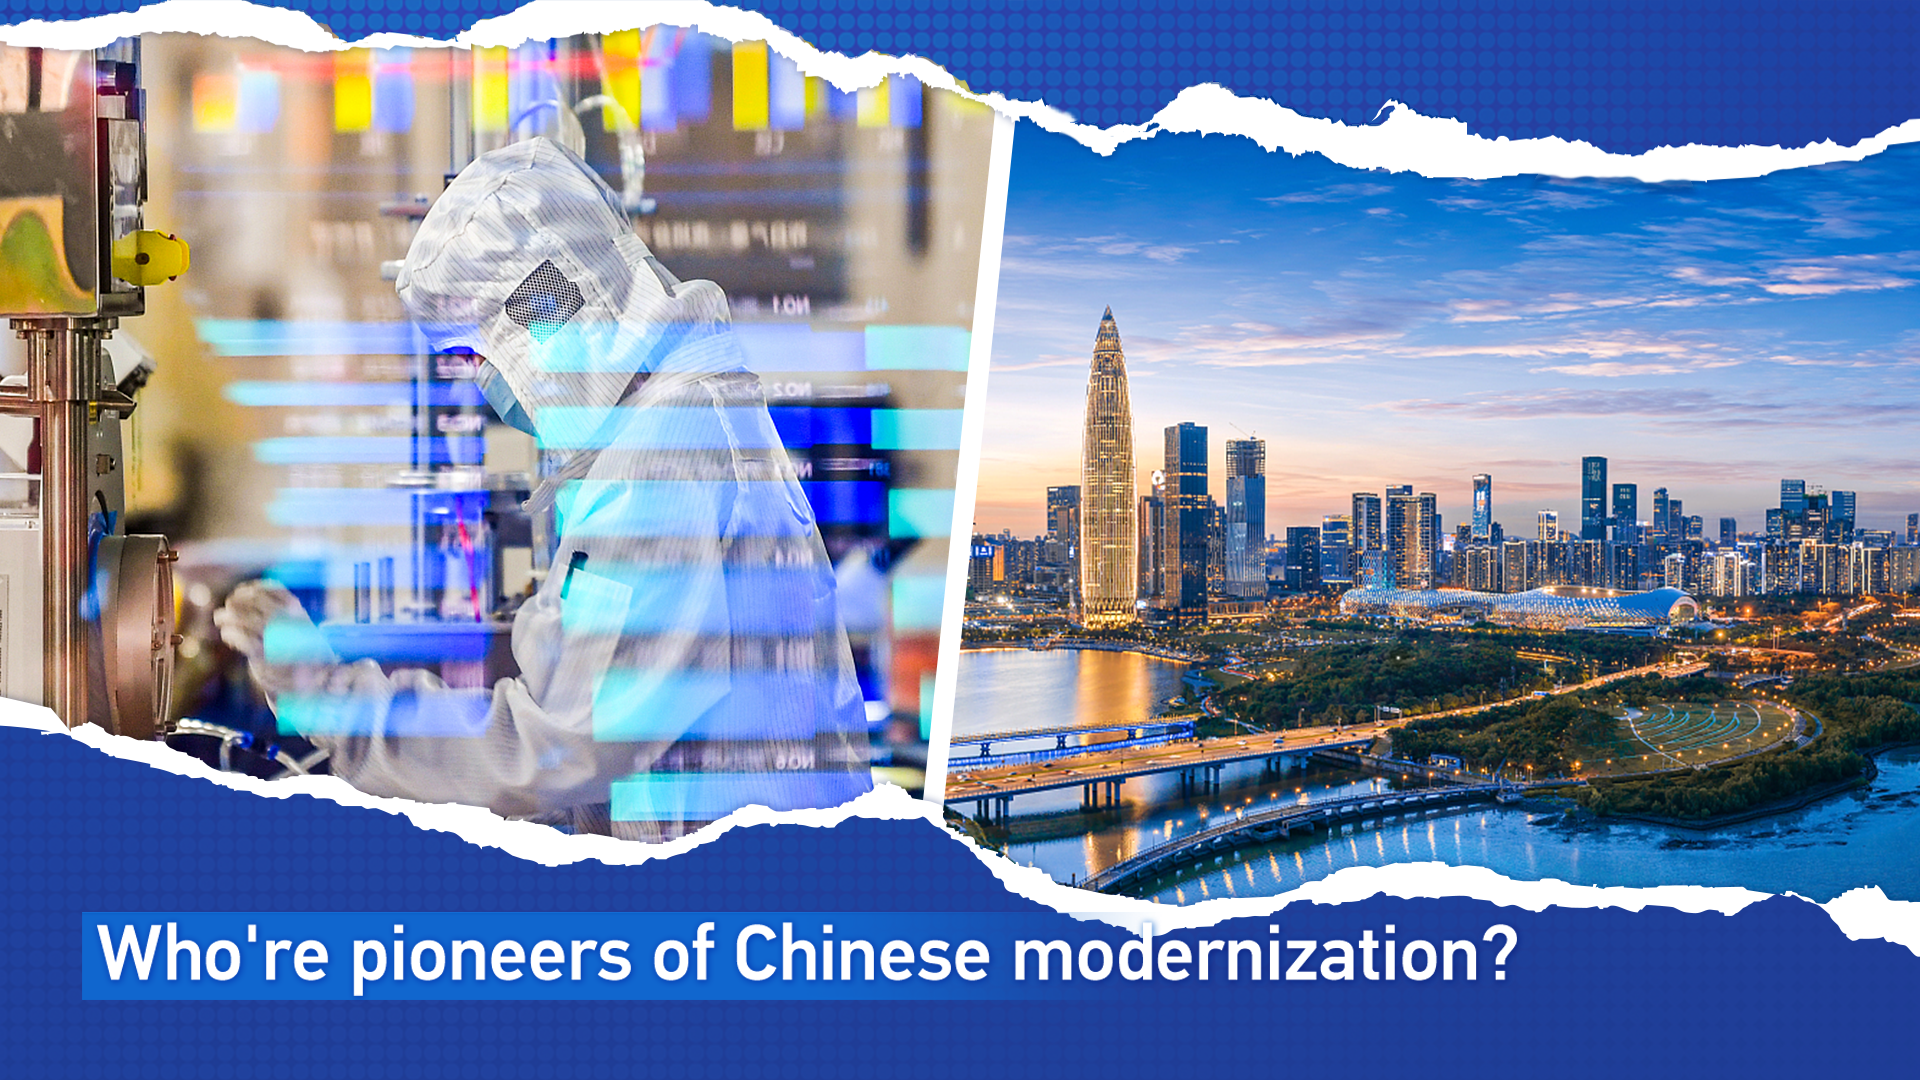 Who are pioneers of Chinese modernization?